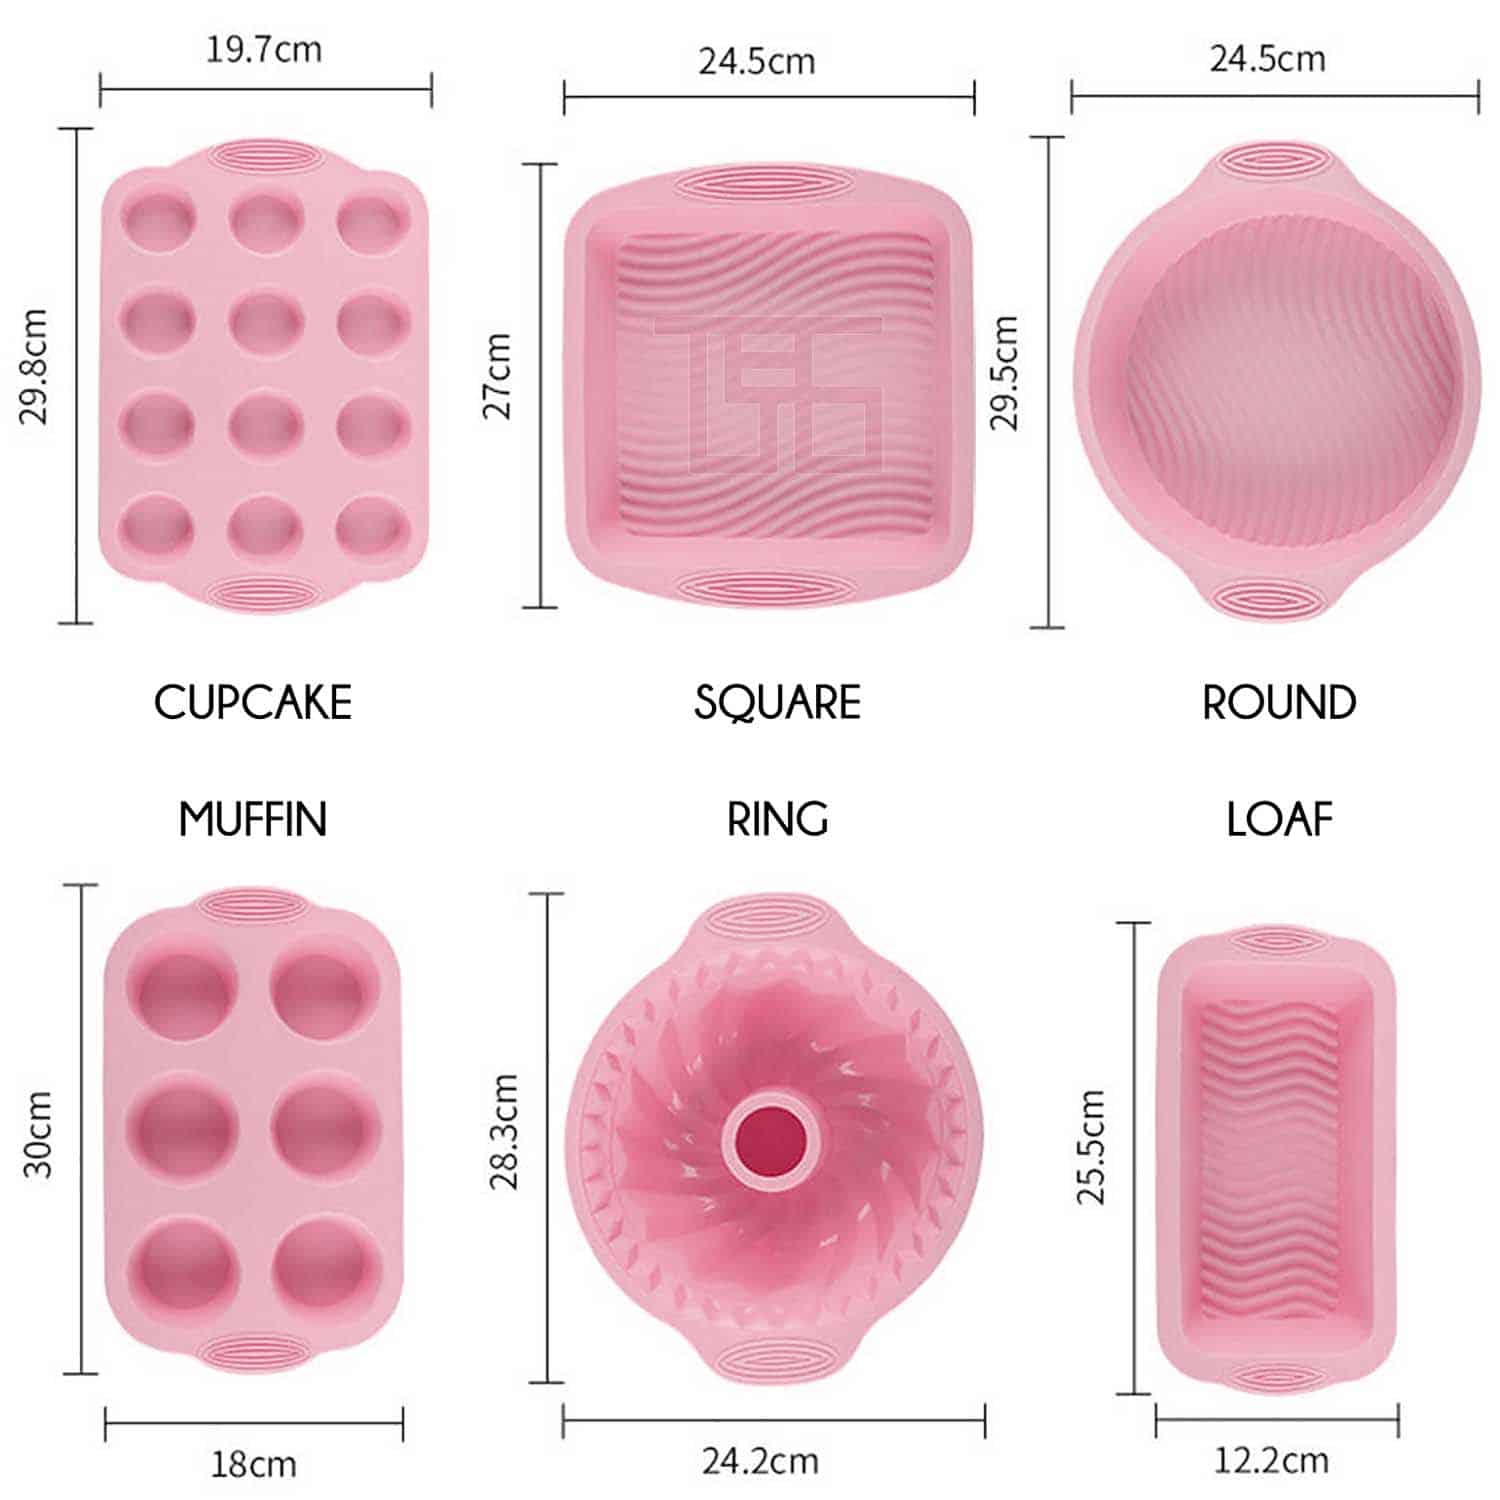 6 Piece Pink Silicone Baking Mould Set